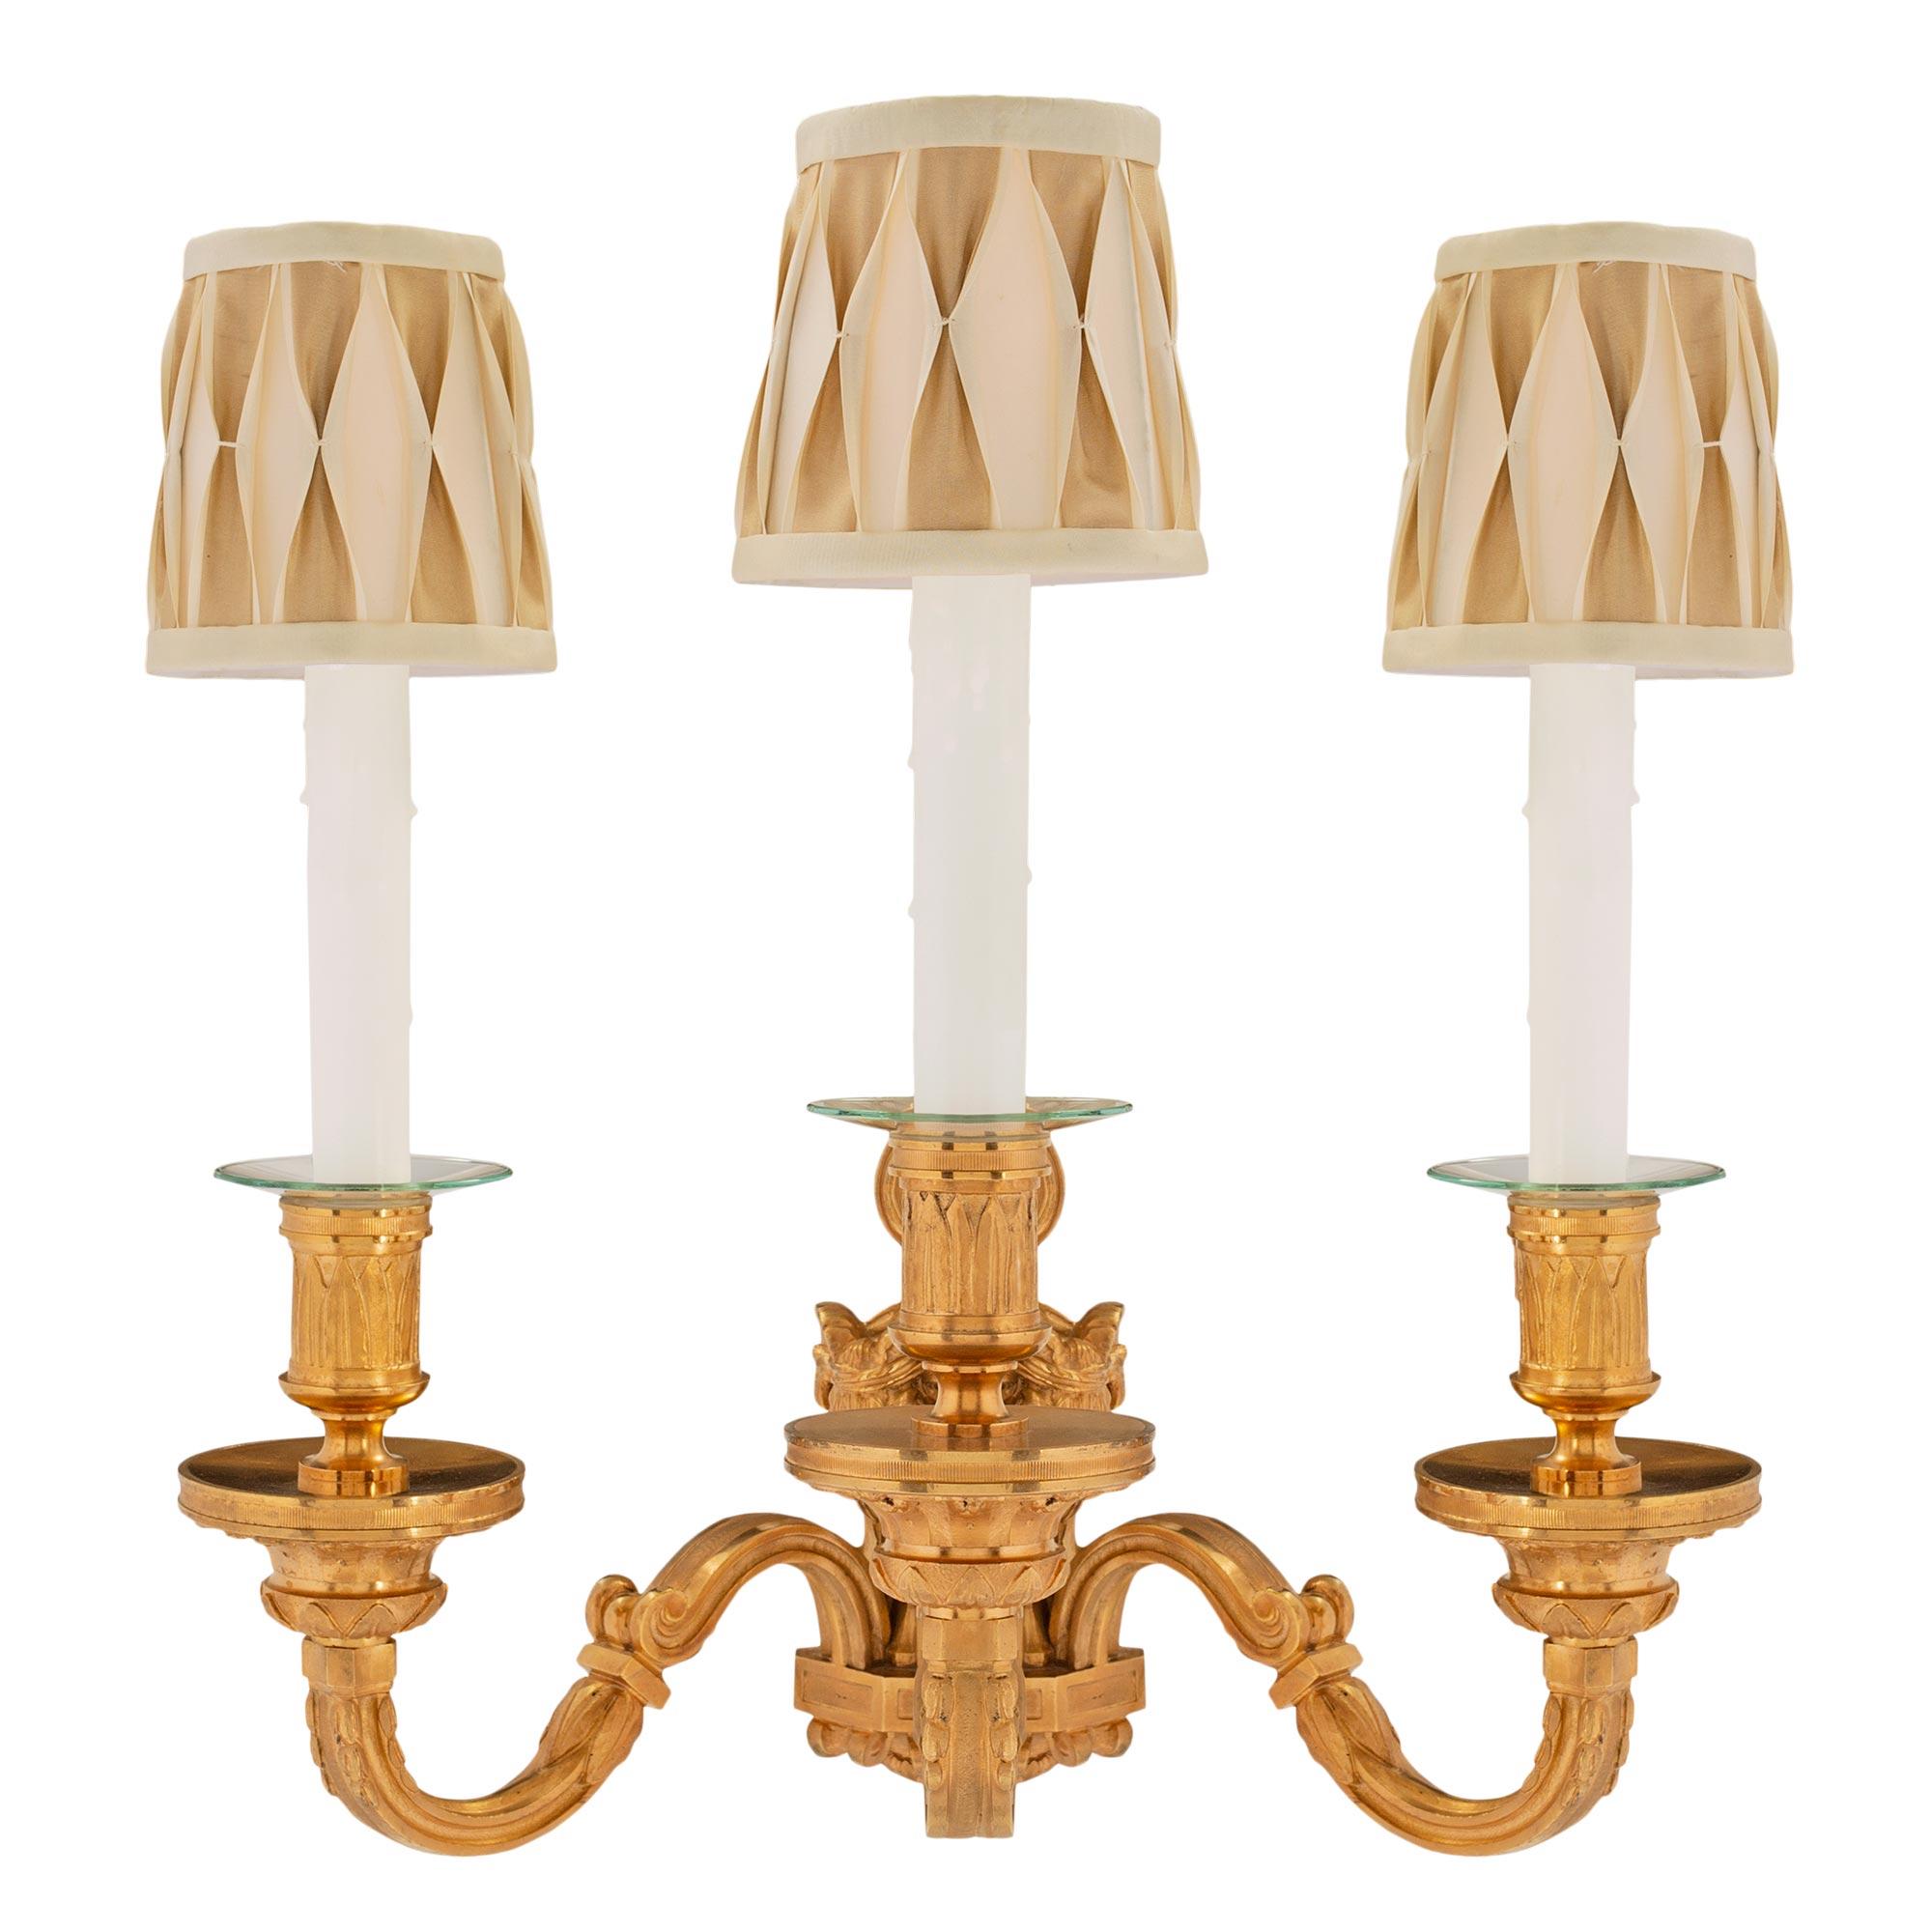 A rare set of six stunning French 19th century Louis XVI style ormolu sconces. Each three arm sconce has a handsome backplate with ram heads and ring, inverted finial and cut corner base. The three S-scrolled arms are decorated with acanthus leaves